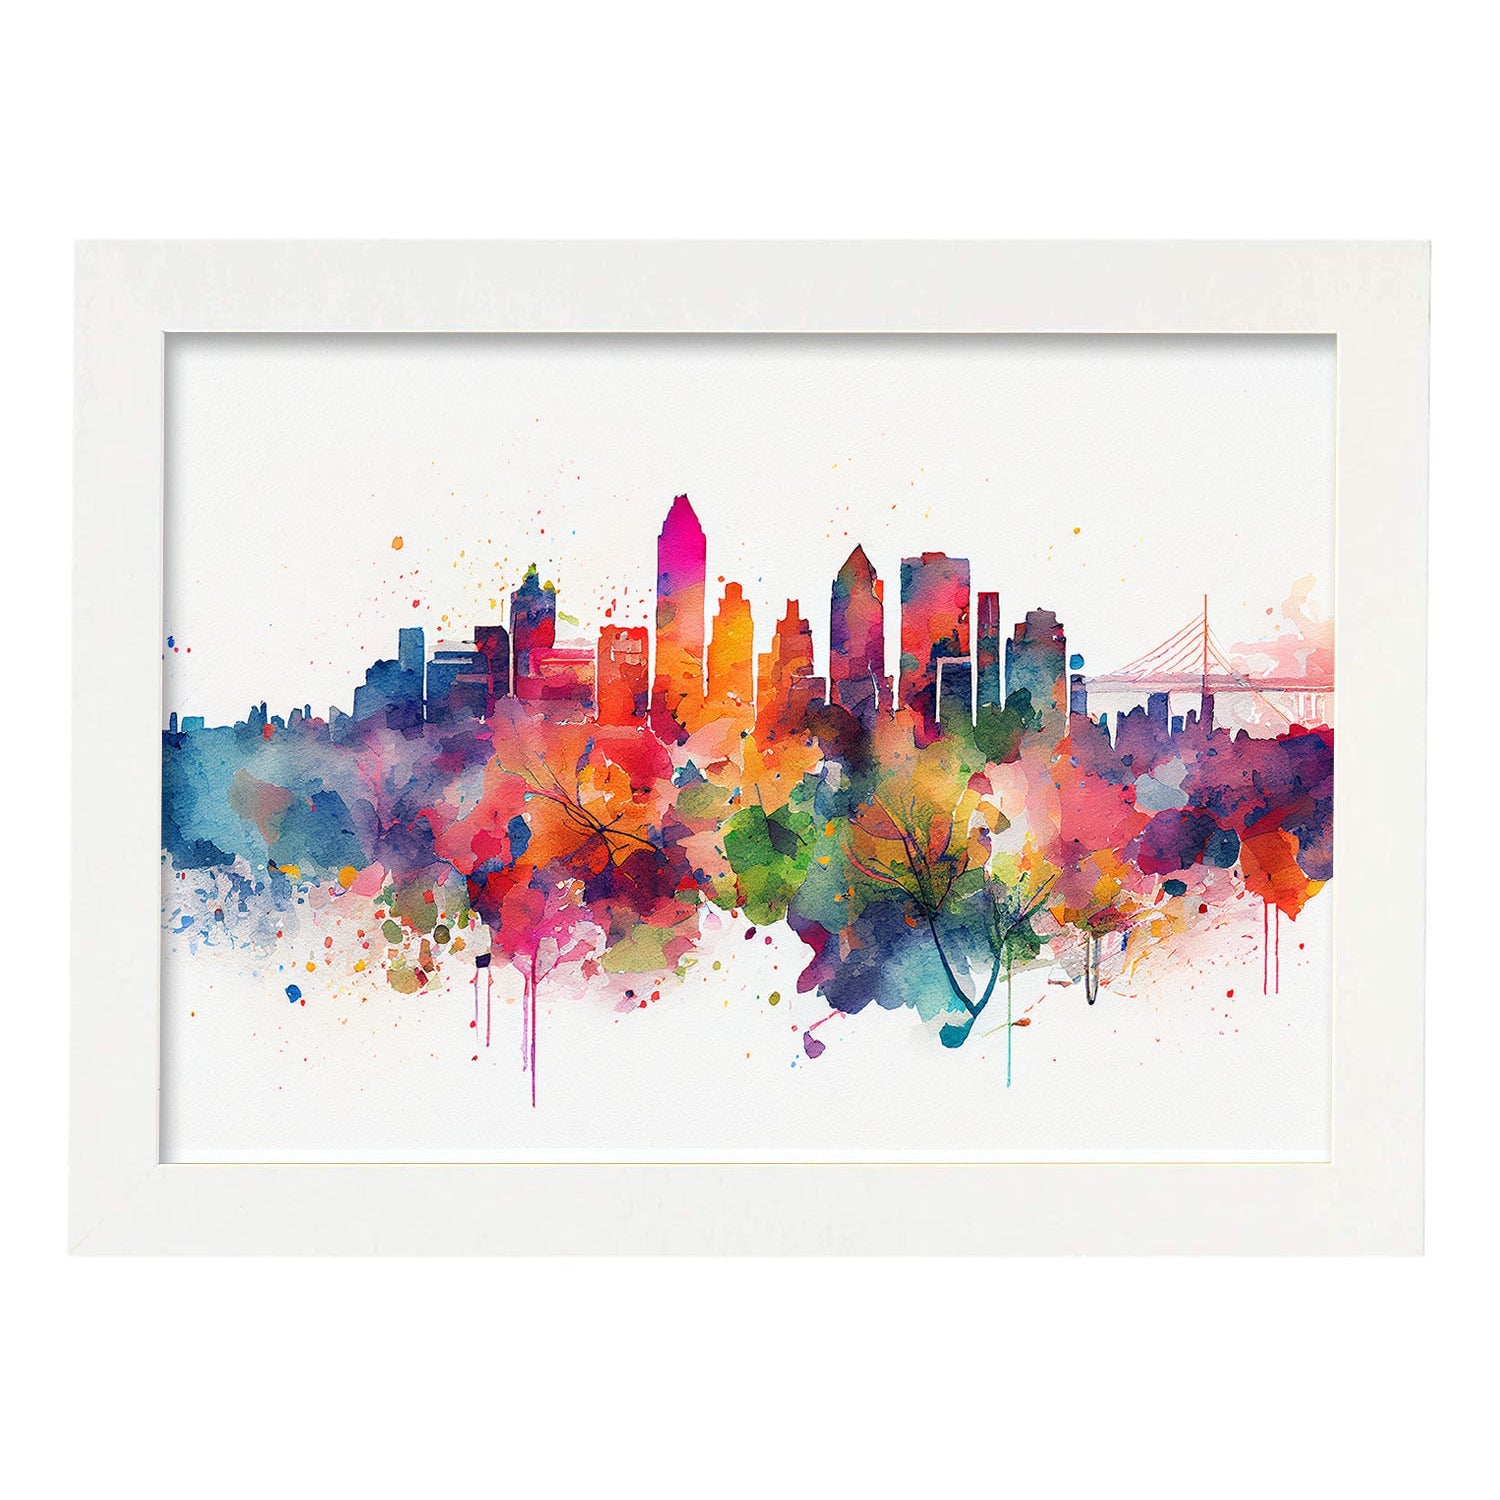 Nacnic watercolor of a skyline of the city of Montreal_1. Aesthetic Wall Art Prints for Bedroom or Living Room Design.-Artwork-Nacnic-A4-Marco Blanco-Nacnic Estudio SL